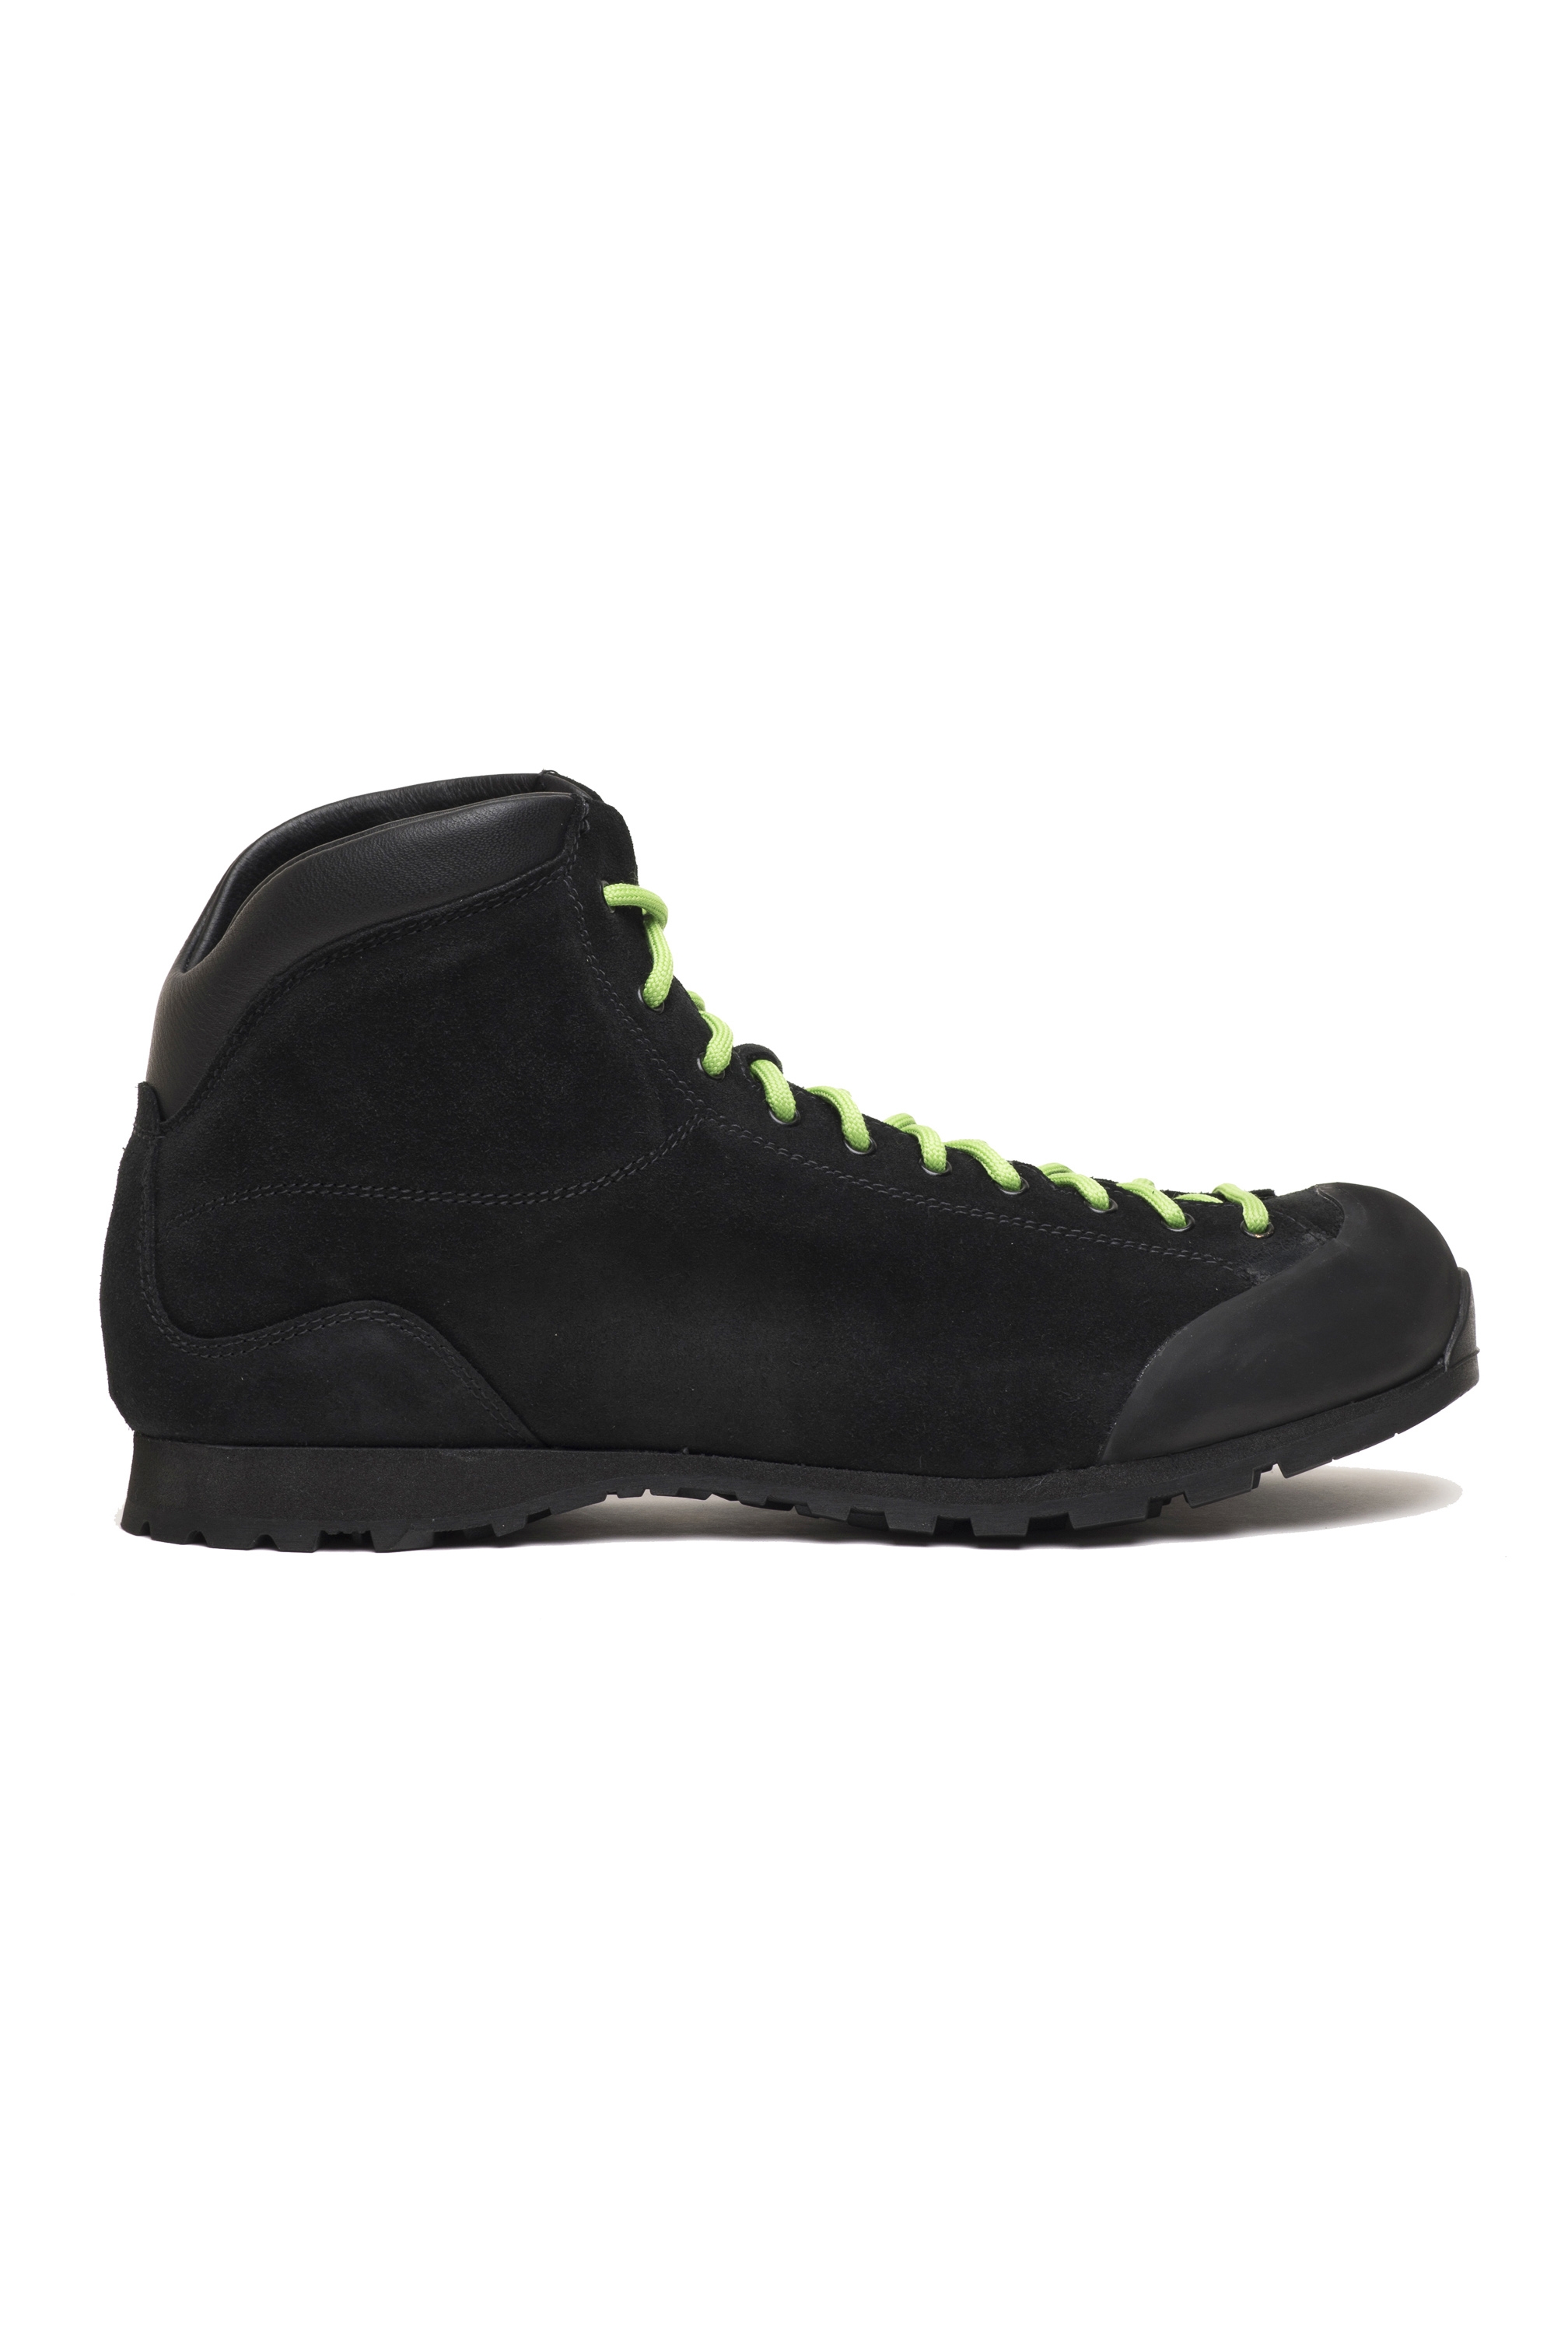 SBU 04663_23AW Hiking boots in black calfskin suede leather 01